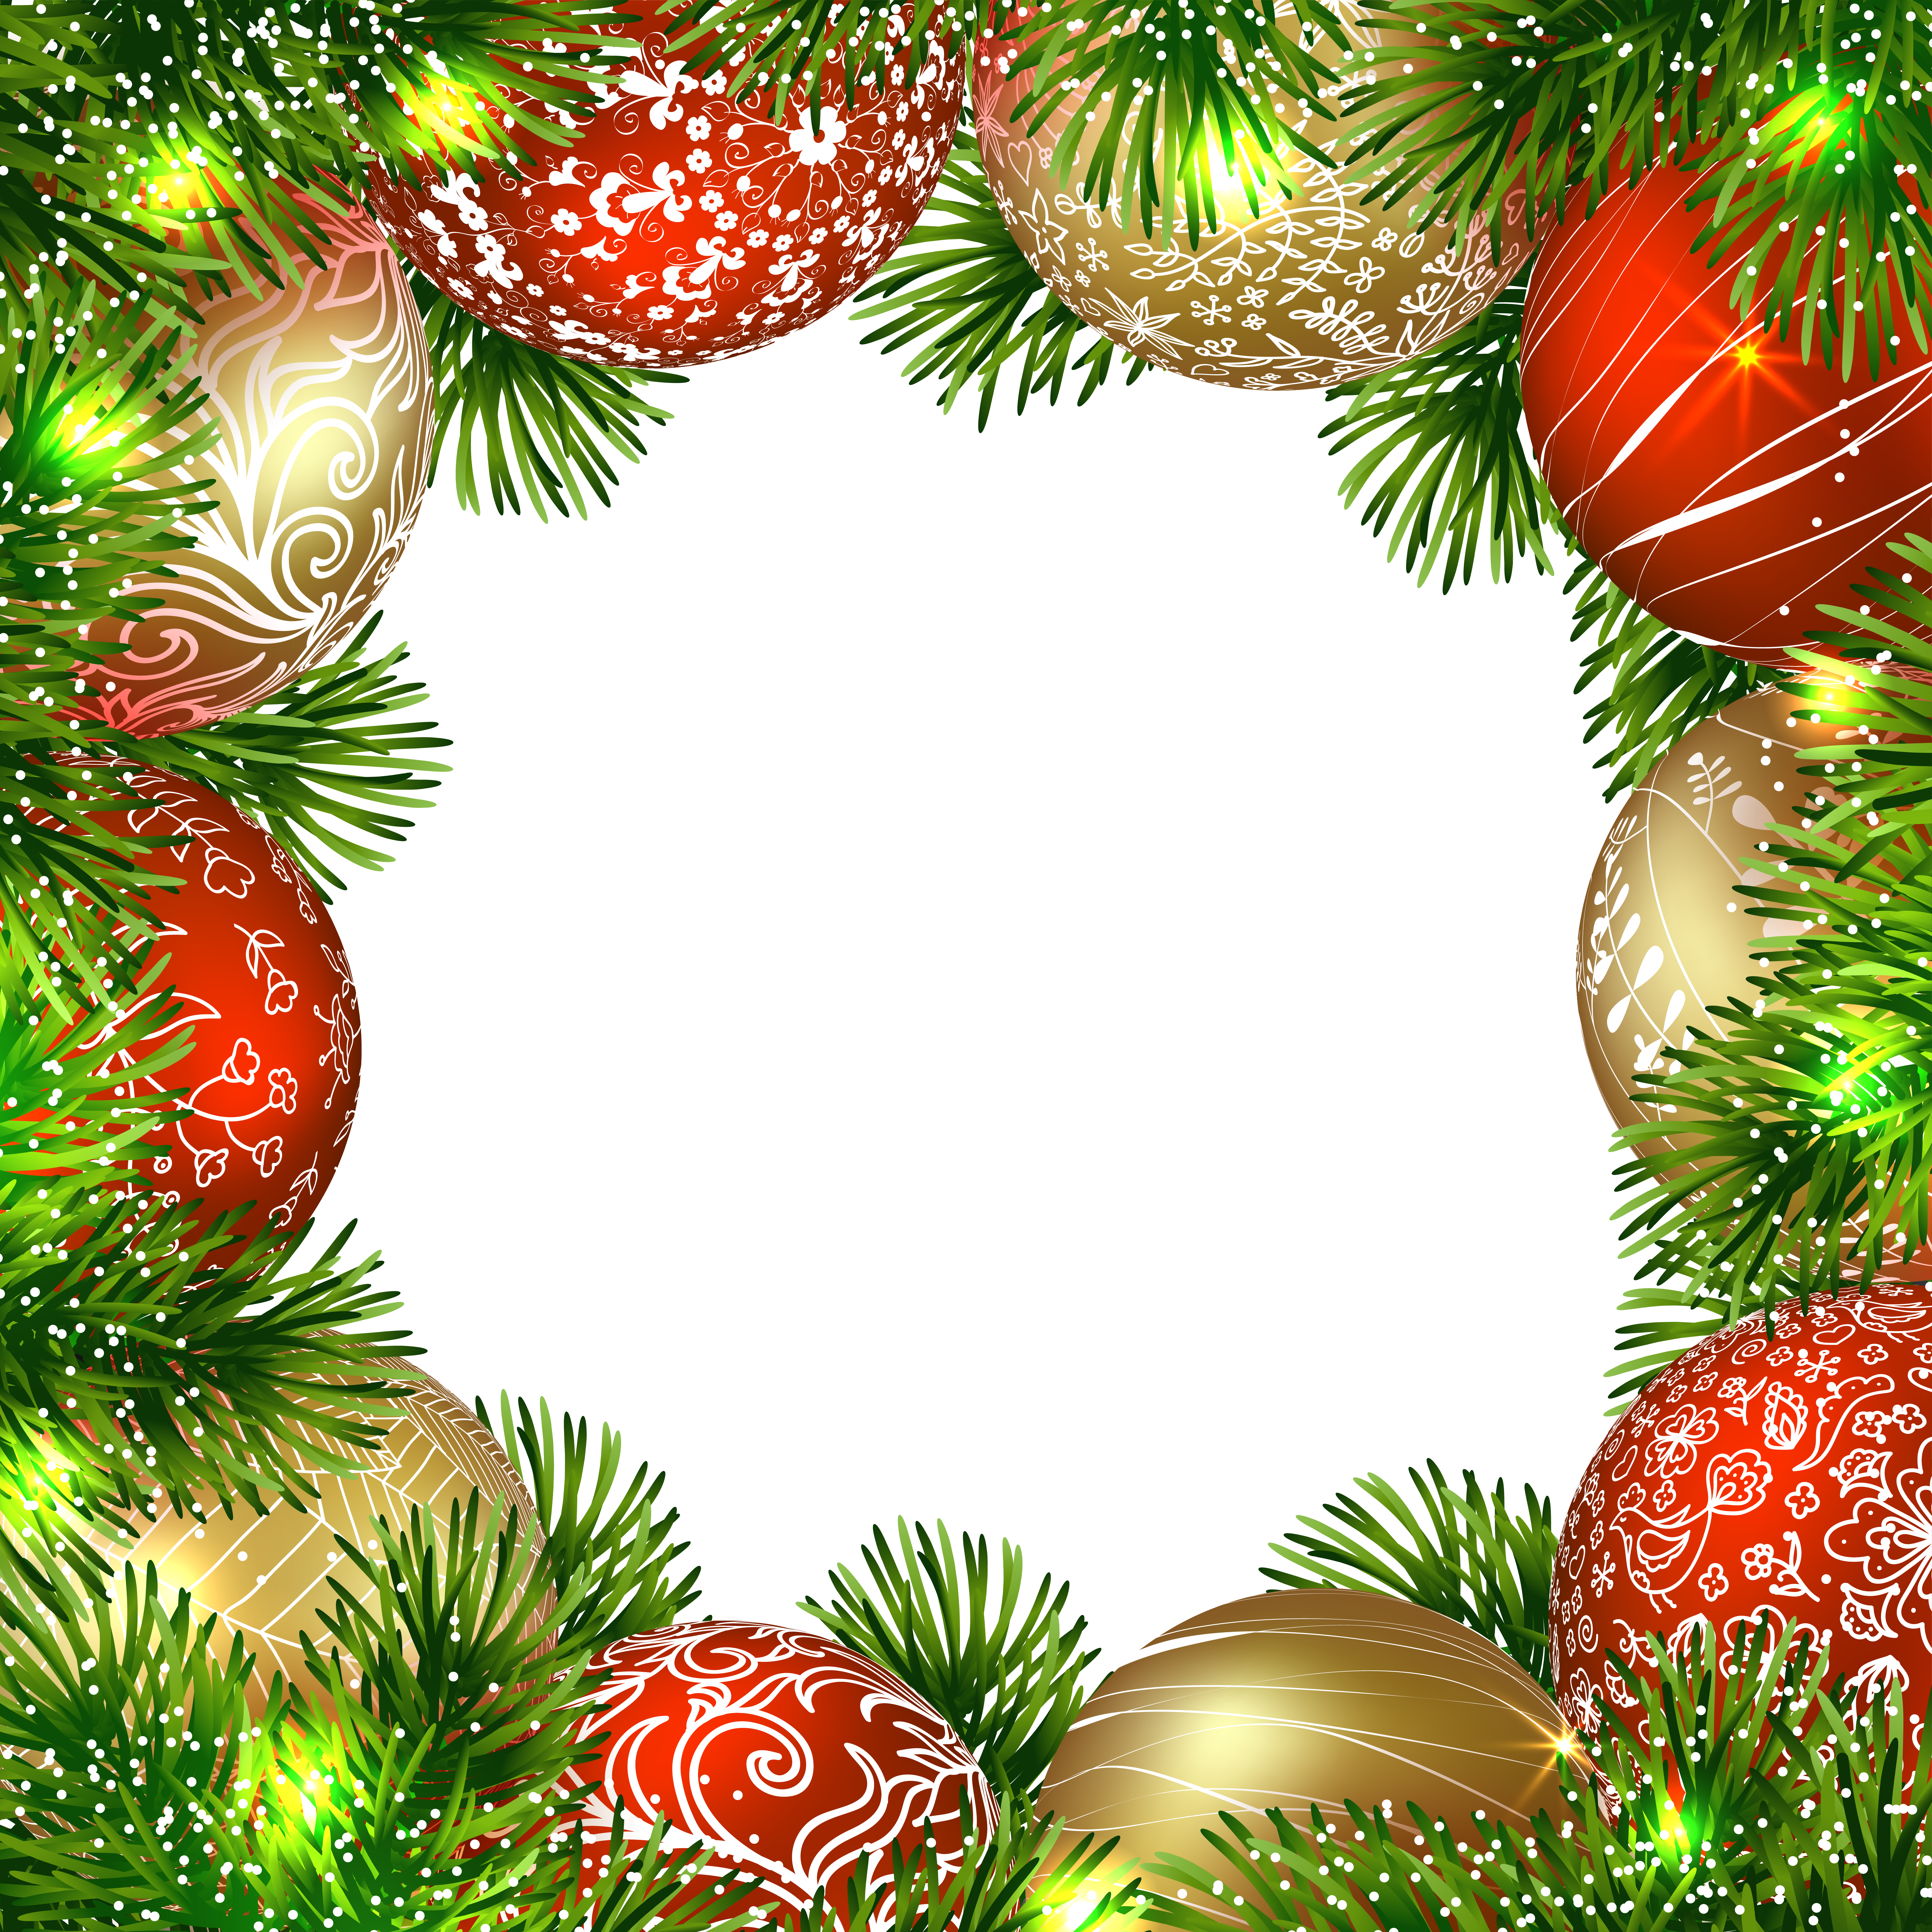 Transparent Christmas Png Border Frame With Ornaments - Transparent Christmas Png Border Frame With Ornaments (7005x7005)